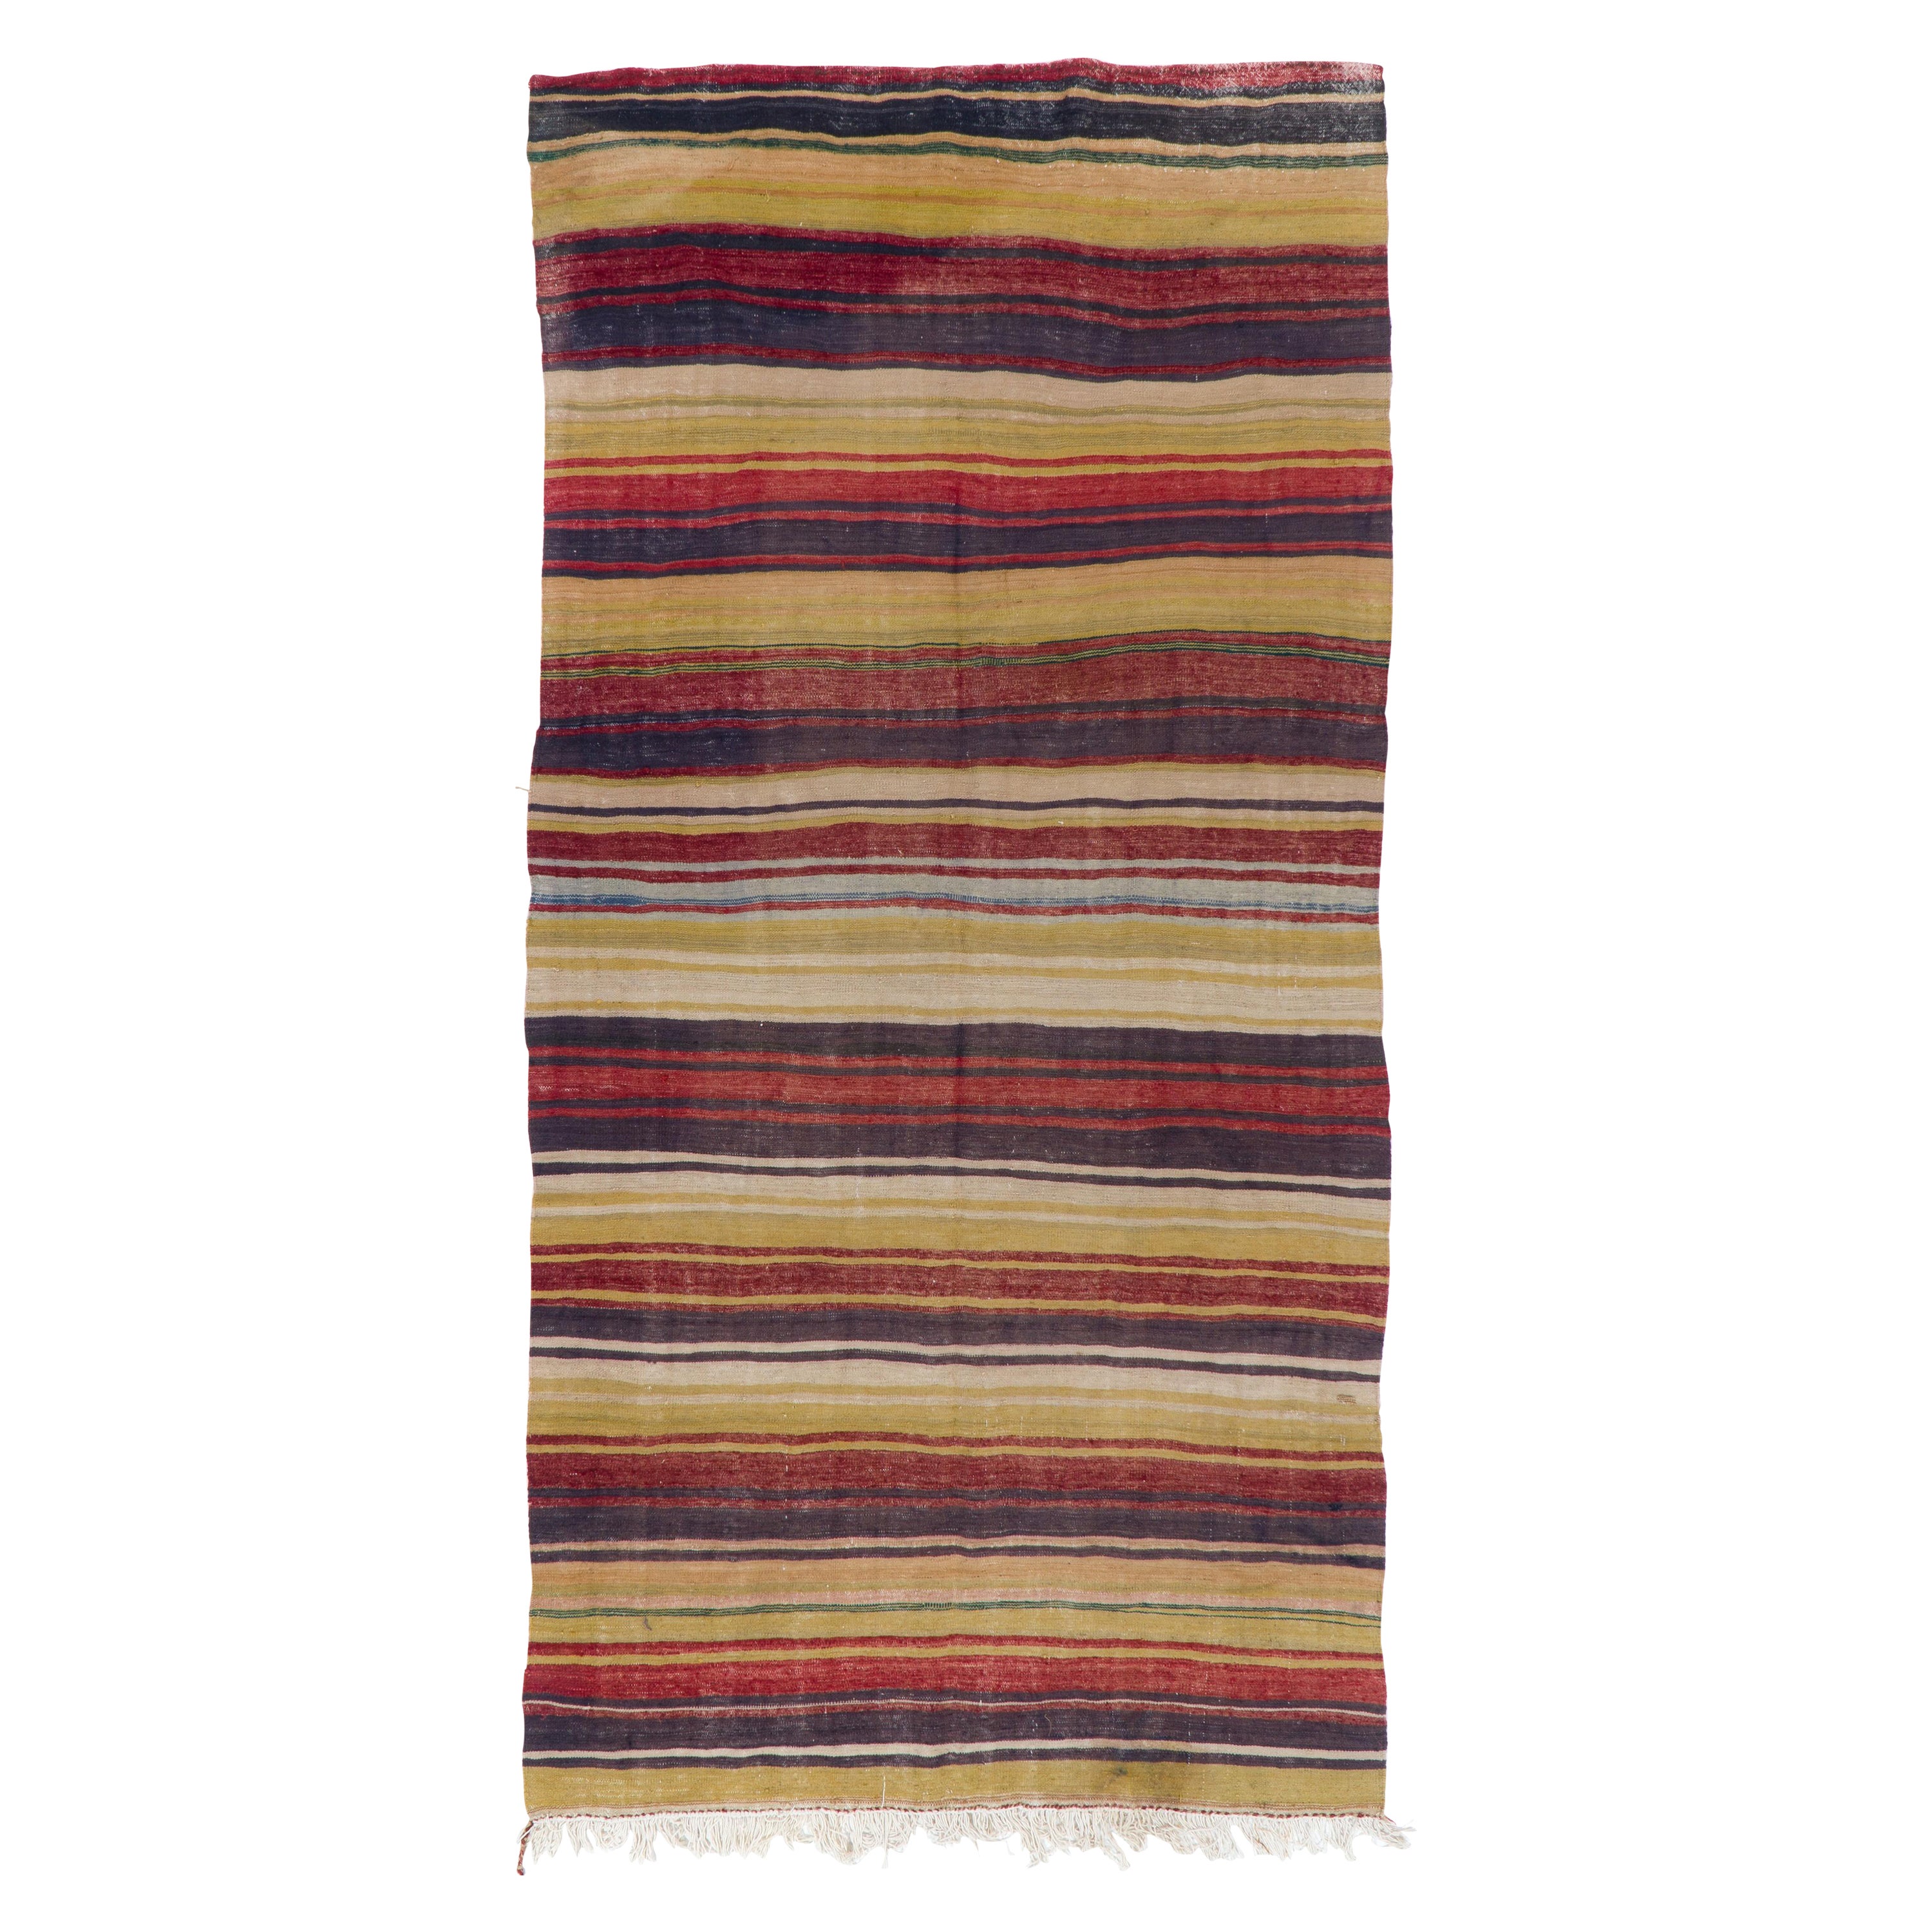 5.2x10.4 ft Hand-Woven Anatolian Runner Kilim "Flat-weave" with Striped Pattern